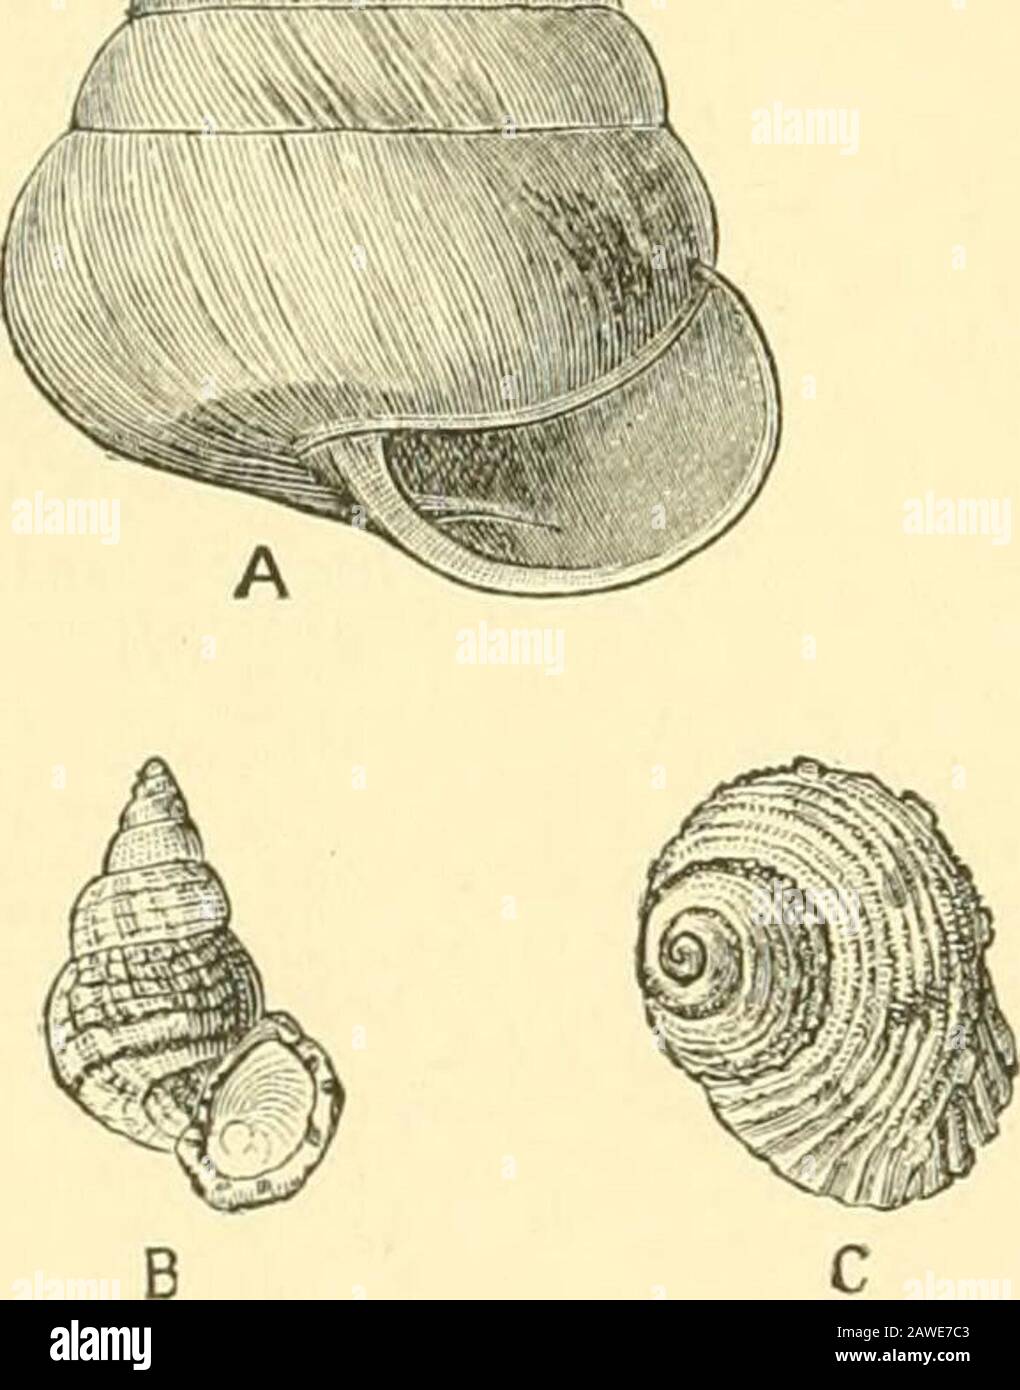 The Cambridge natural history . oint ofnumbers and variety, quite unequalled in the world. There arein all as many as 56 genera and more than 440 species, thelatter being nearly all peculiar. The principal features are the 148 JAMAICA Glandinae, the Helicidae, and the land operculates. The Glan-dinae belong principally to the sub-genera Varicella, Melia, andVolutaxis, Streptostyla being absent, although occurring in Cubaand San Domingo. There are 10 genera of Helix, of whichPleurodonta is quite peculiar, while Sagda (13 sp.) is commononly with S.W. San Domingo (2 sp.), and Leptoloma (8 sp.) on Stock Photo